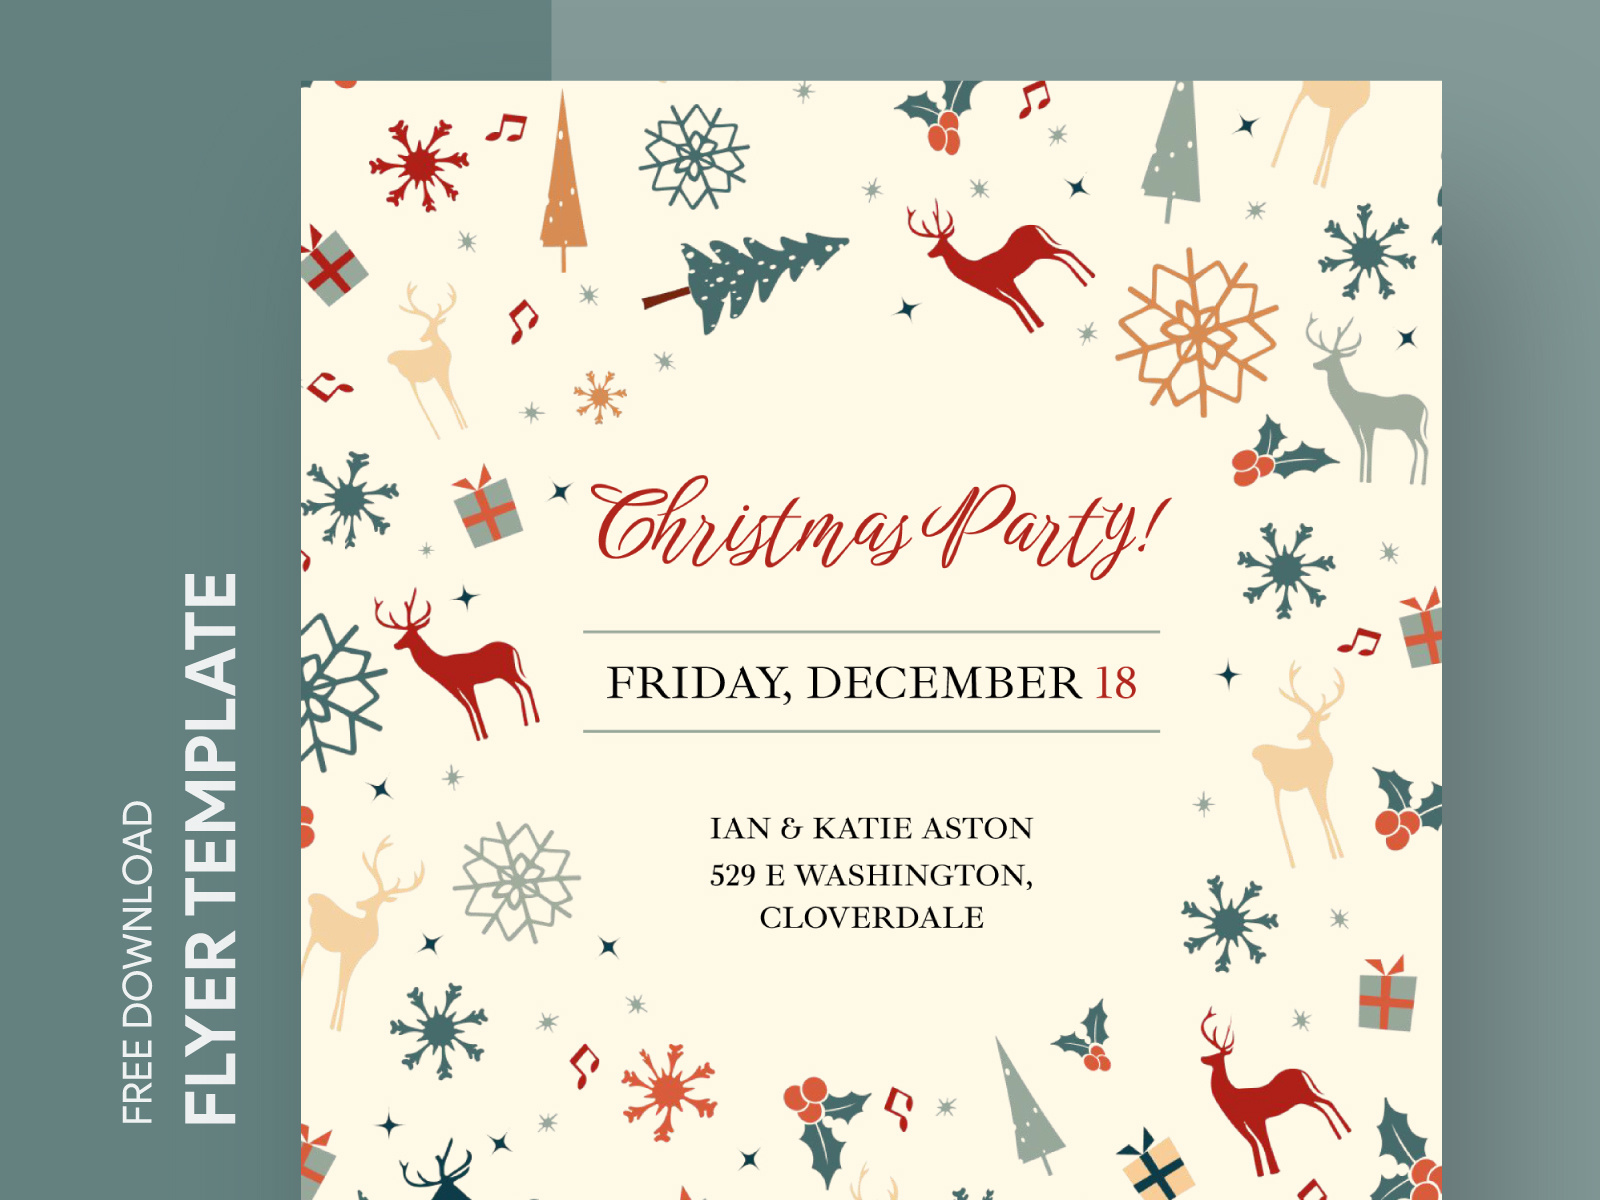 Christmas Party Invitation Free Google Docs Template by Free Google